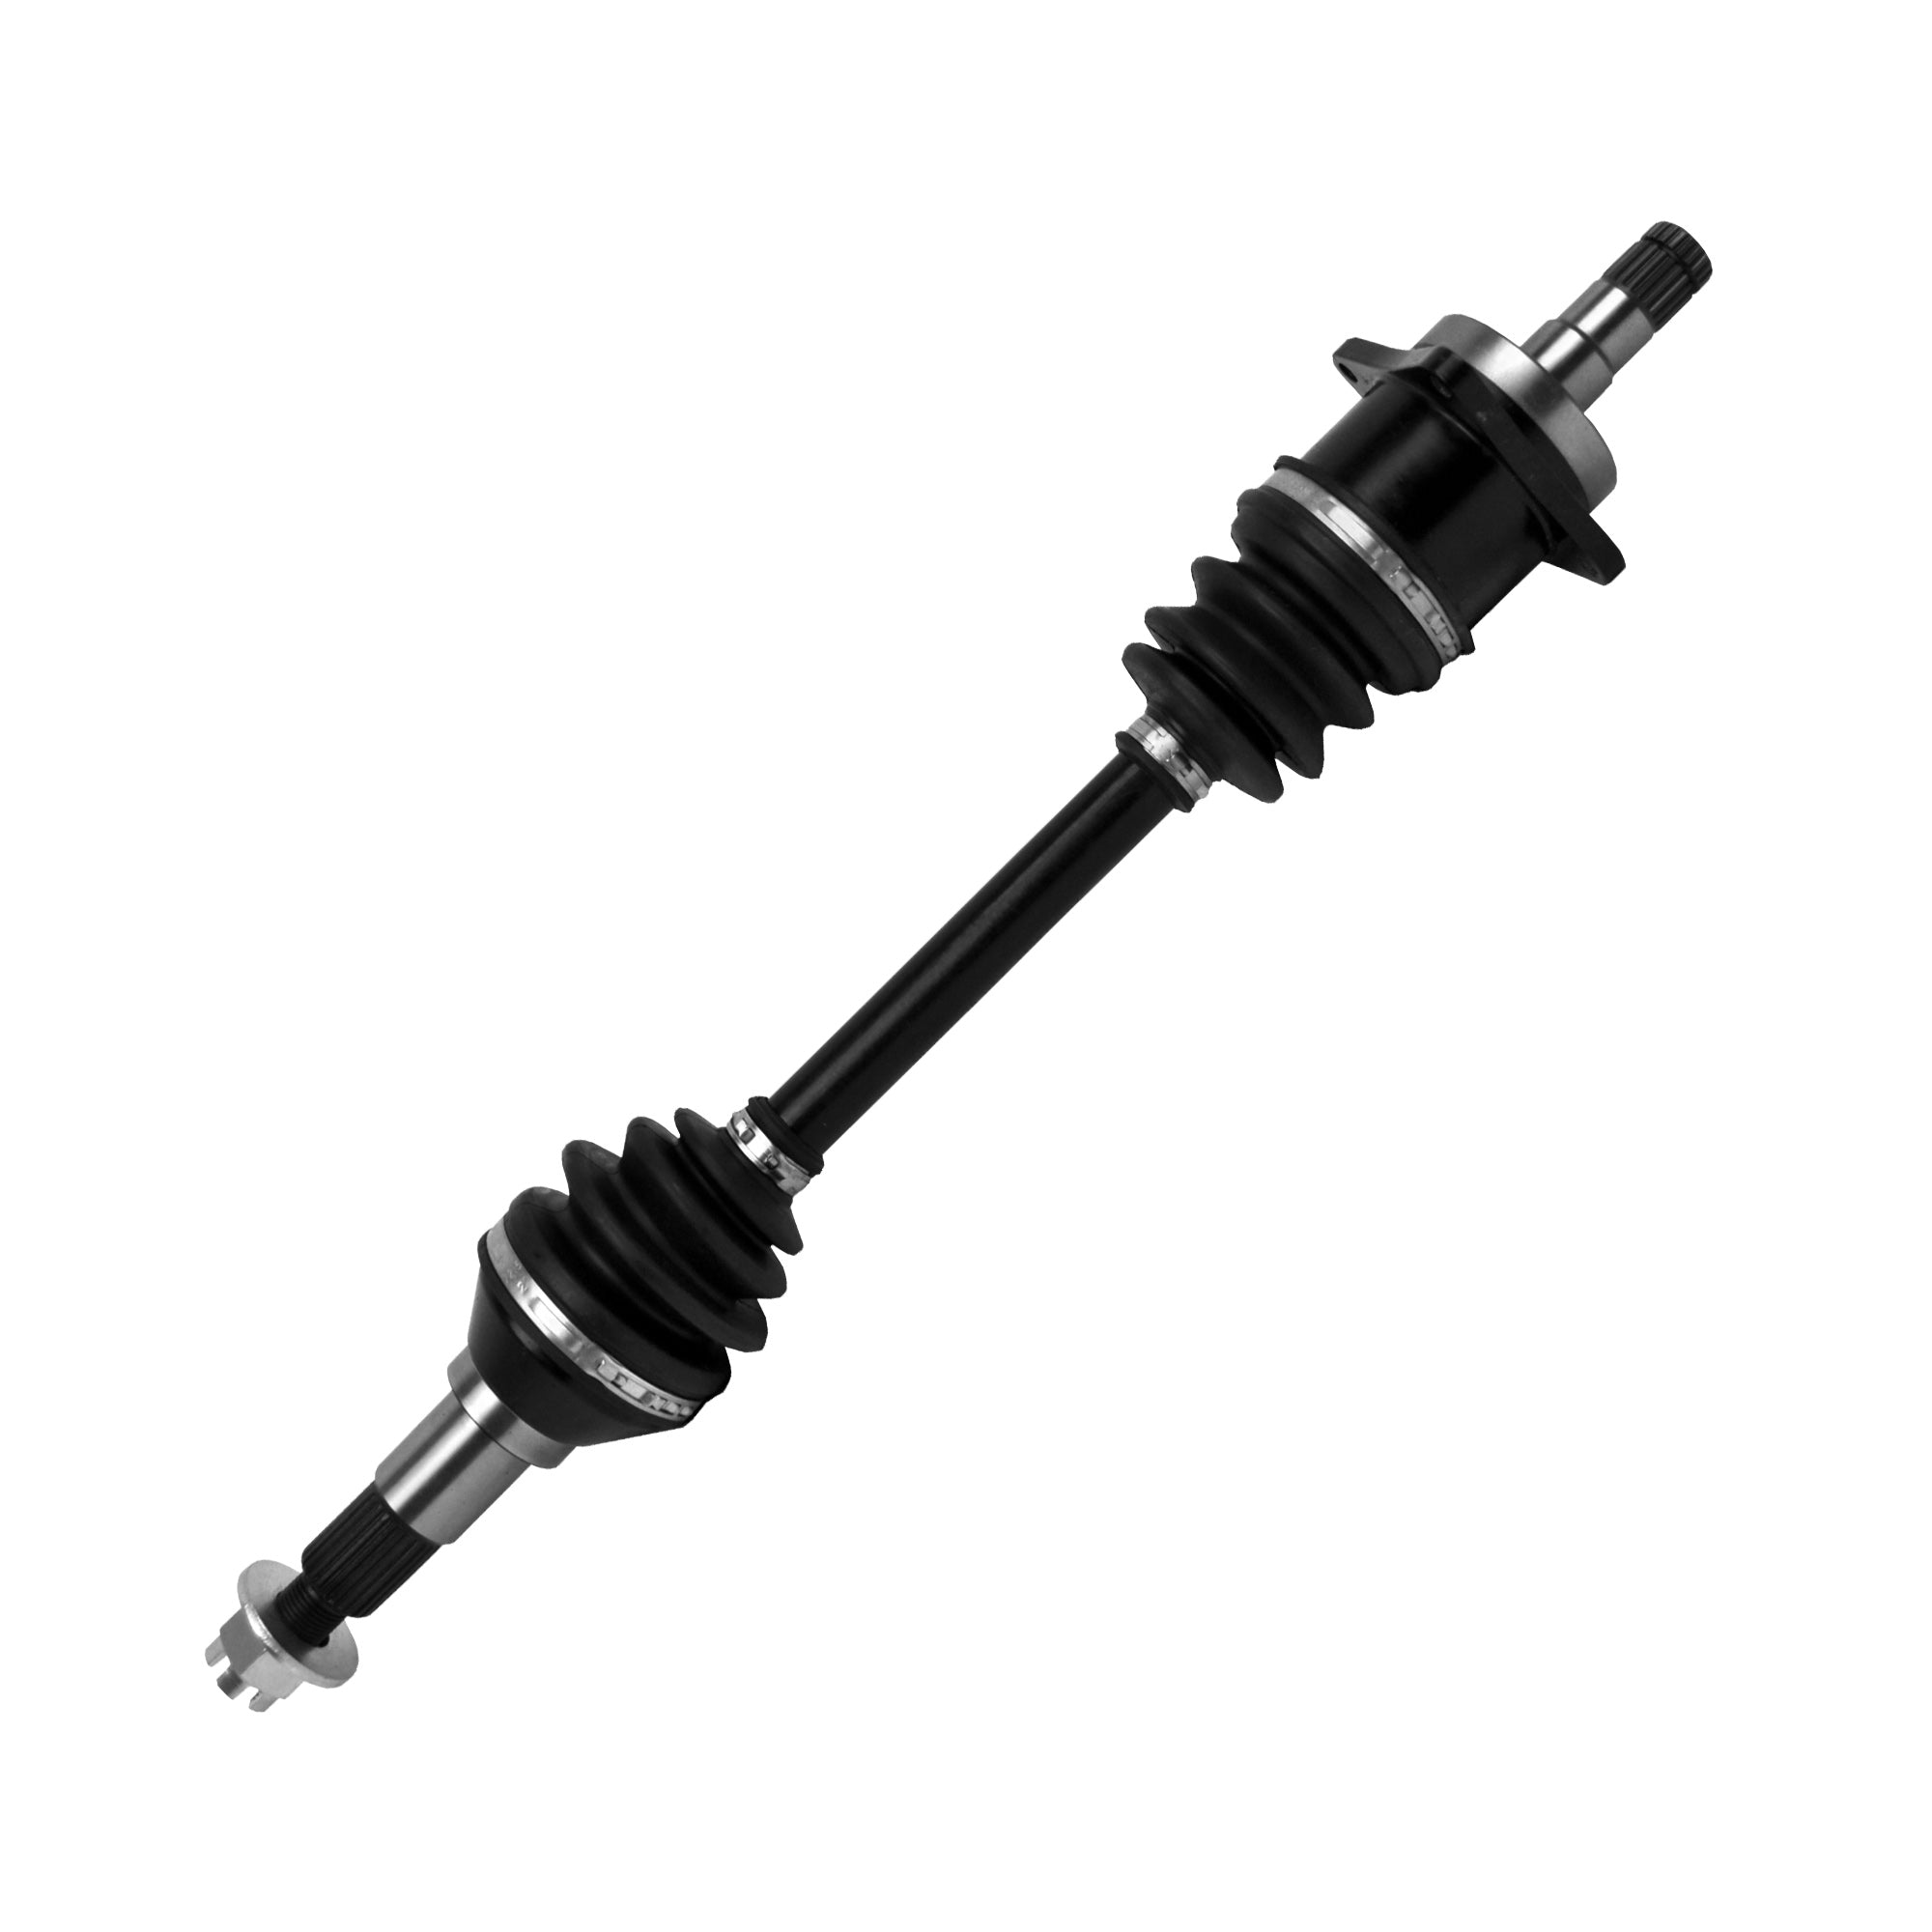 Performance Axle for Can Am Outlander 650 